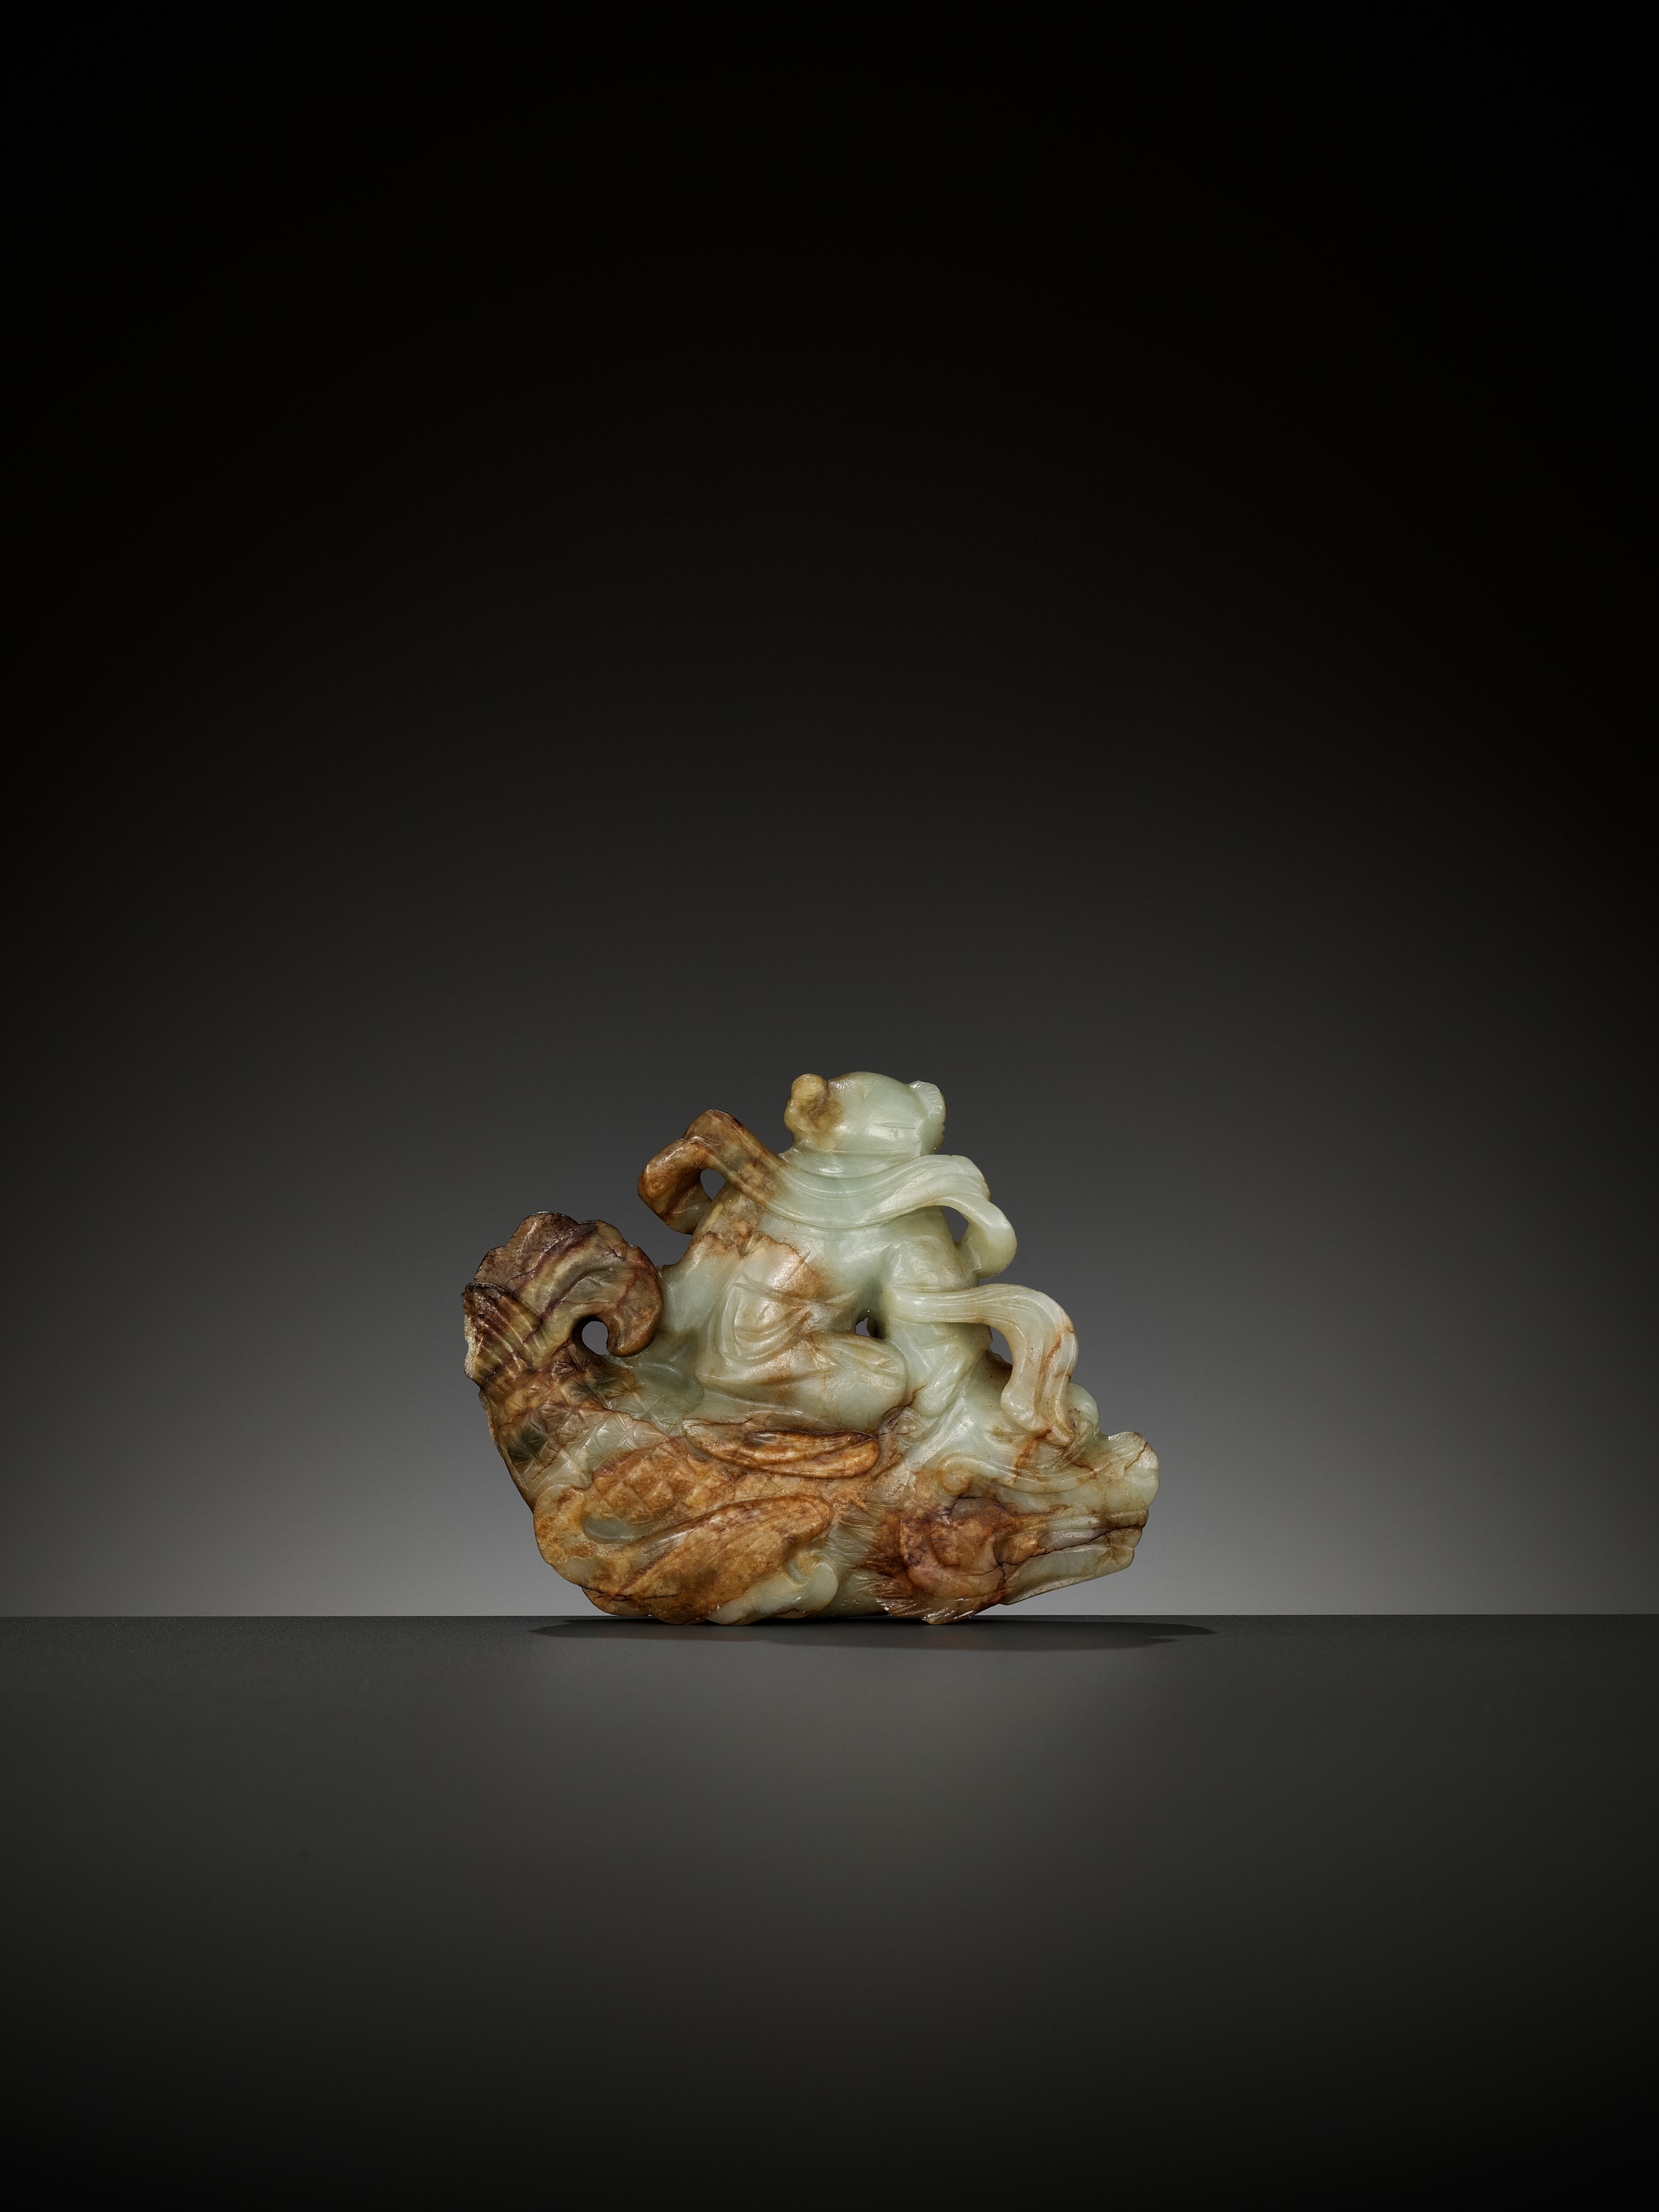 A CELADON AND RUSSET JADE FIGURE OF A BOY RIDING A DRAGON-CARP, 17TH-18TH CENTURY - Image 2 of 13